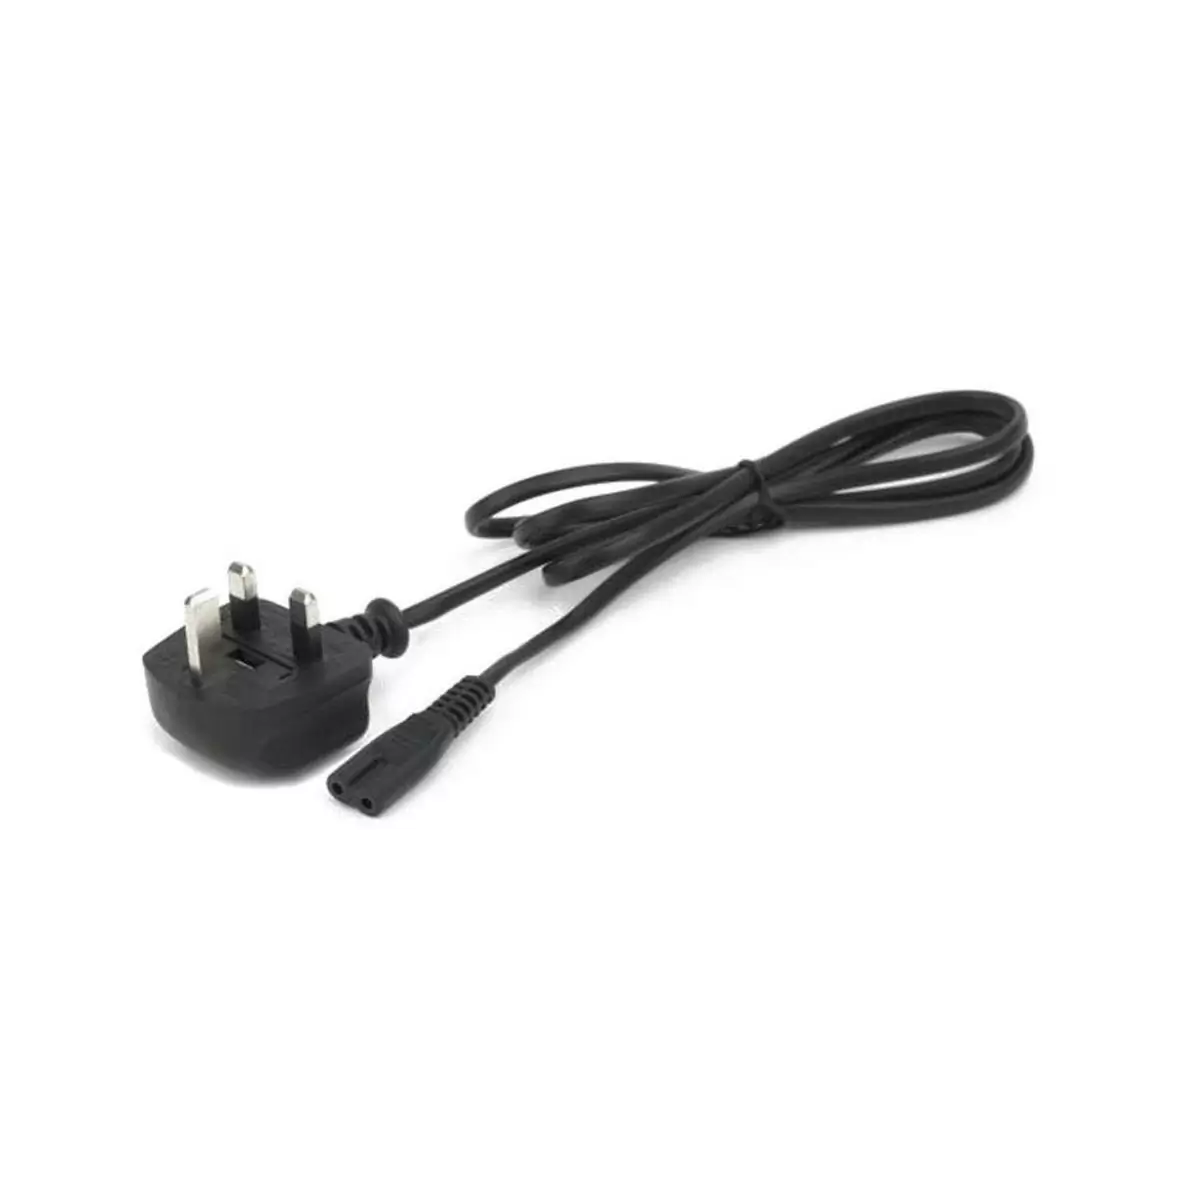 Battery charger power cable active performance uk plug - image